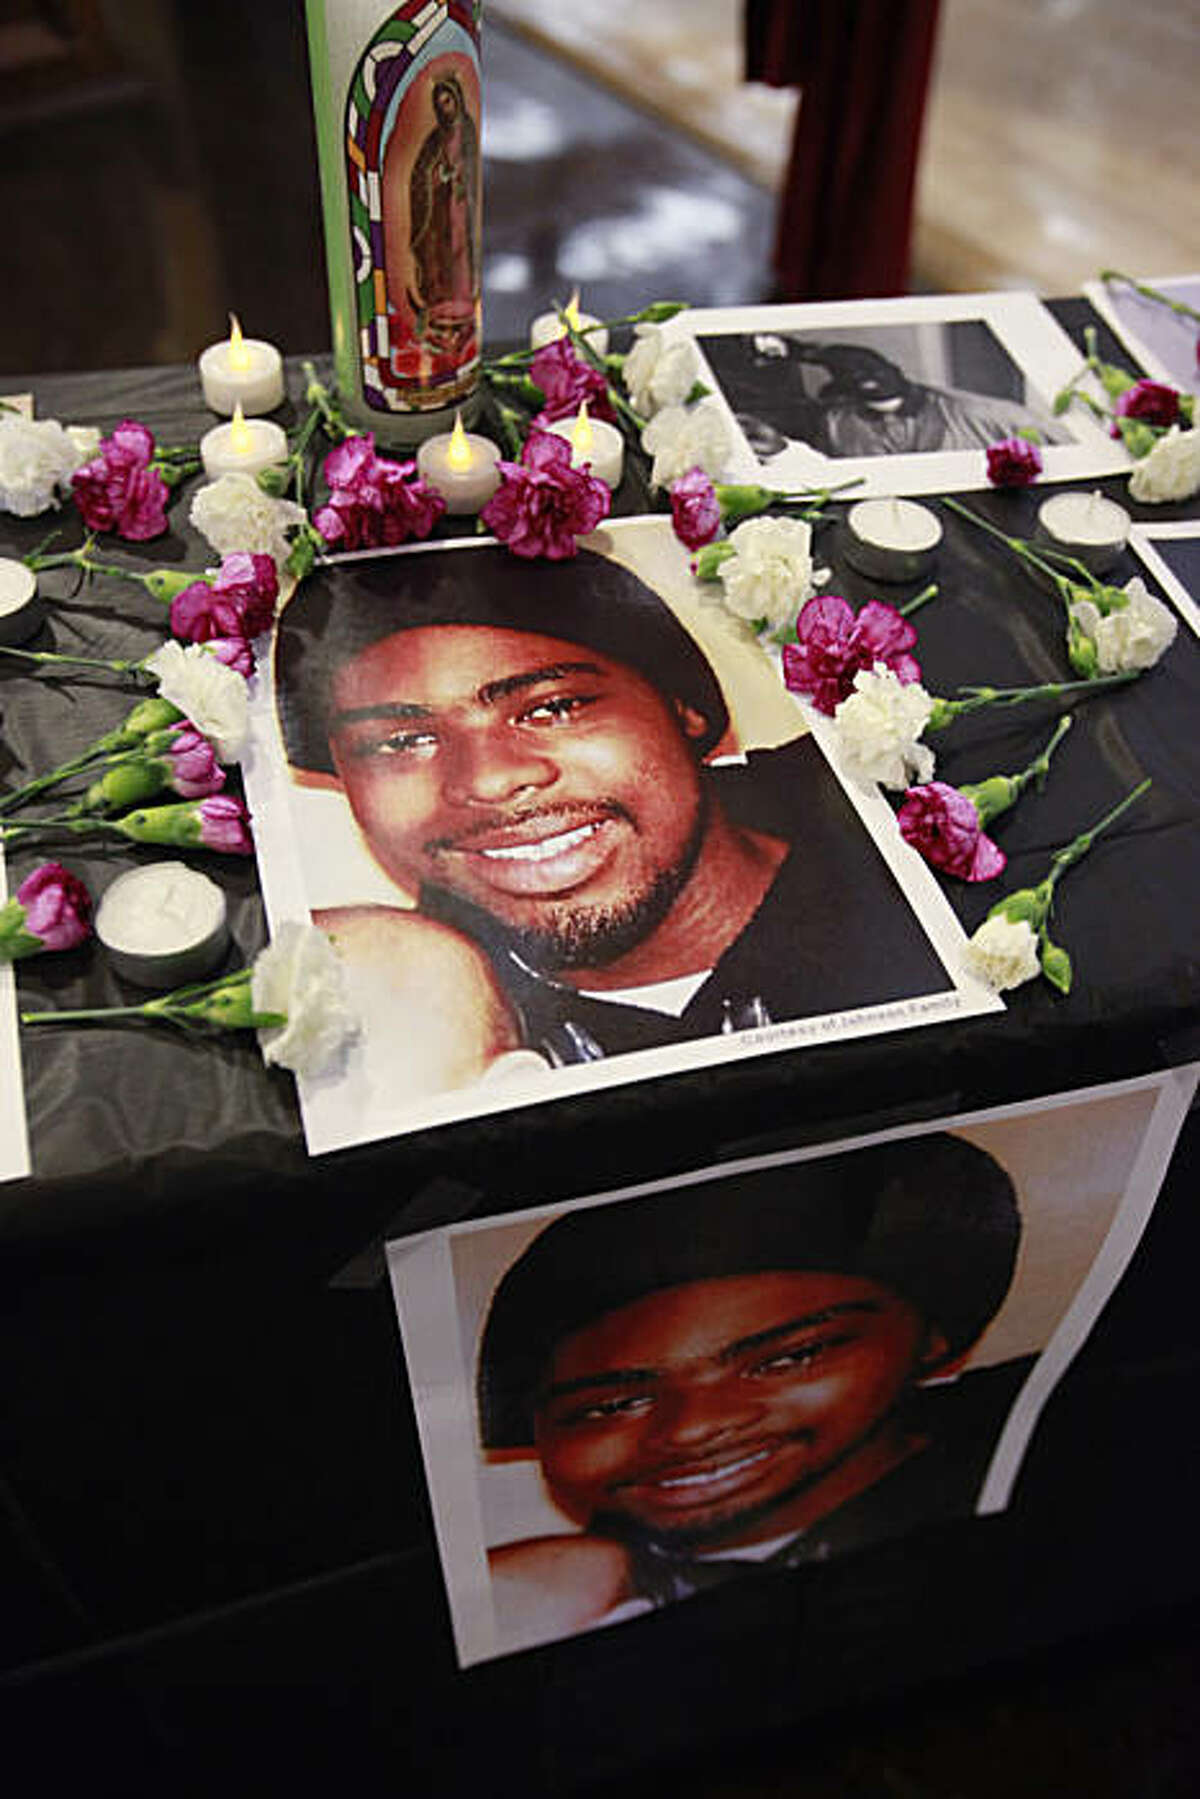 Flowers and pictures of Oscar Grant are on display in Oakland, Calif., Thursday, July 1, 2010 during a gathering to stop the violence in Oakland. Former San Francisco Bay Area Rapid Transit police officer Johannes Mehserle is on trial in Los Angeles for shooting unarmed black man Oscar Grant on New Year's Day 2009 at a BART station in Oakland.